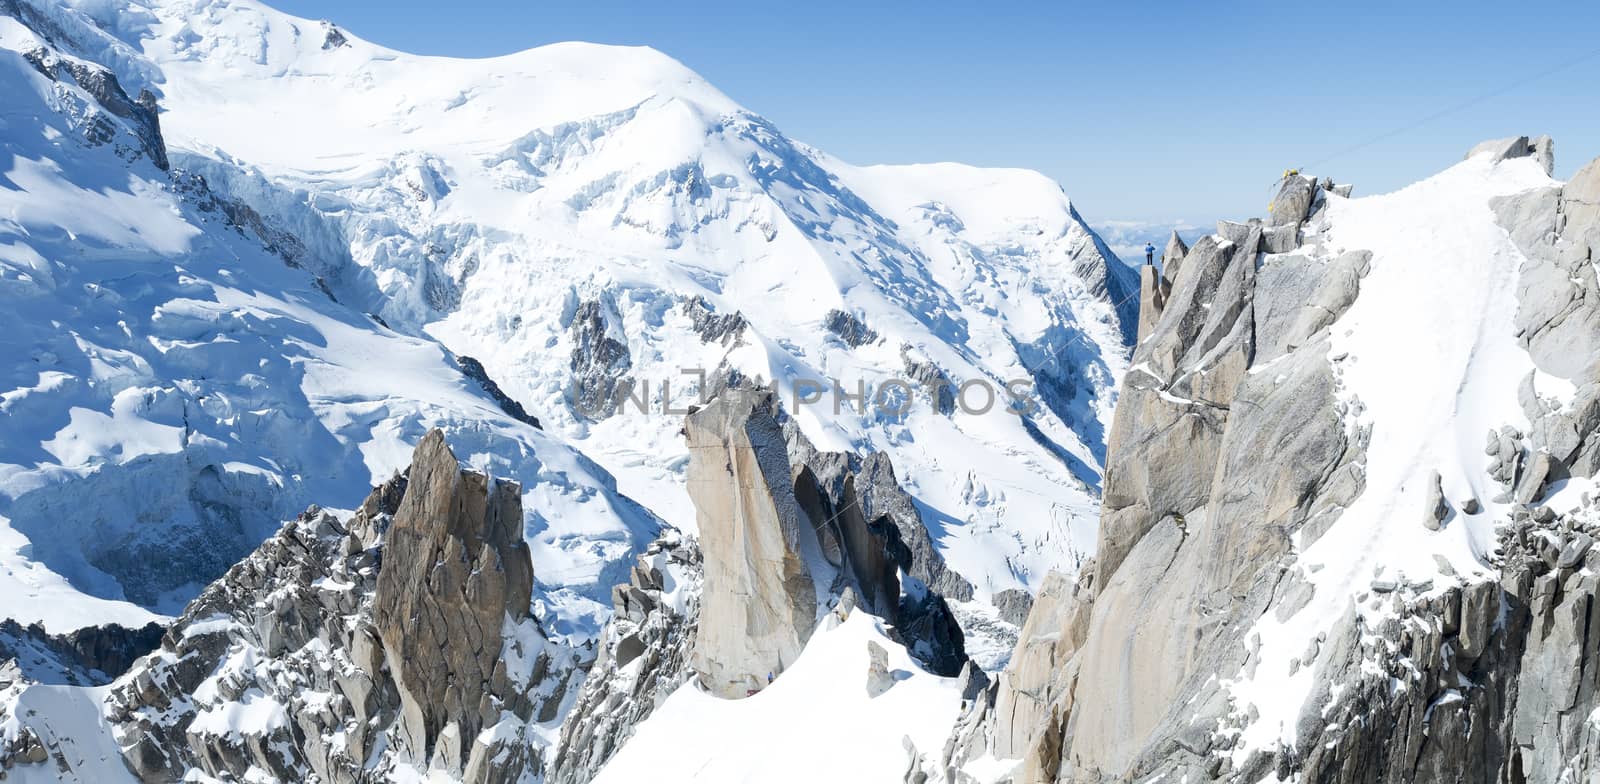 Panoramic composite of Mont Blanc mountain range, In Chamonix, France, with climbers on its rocks